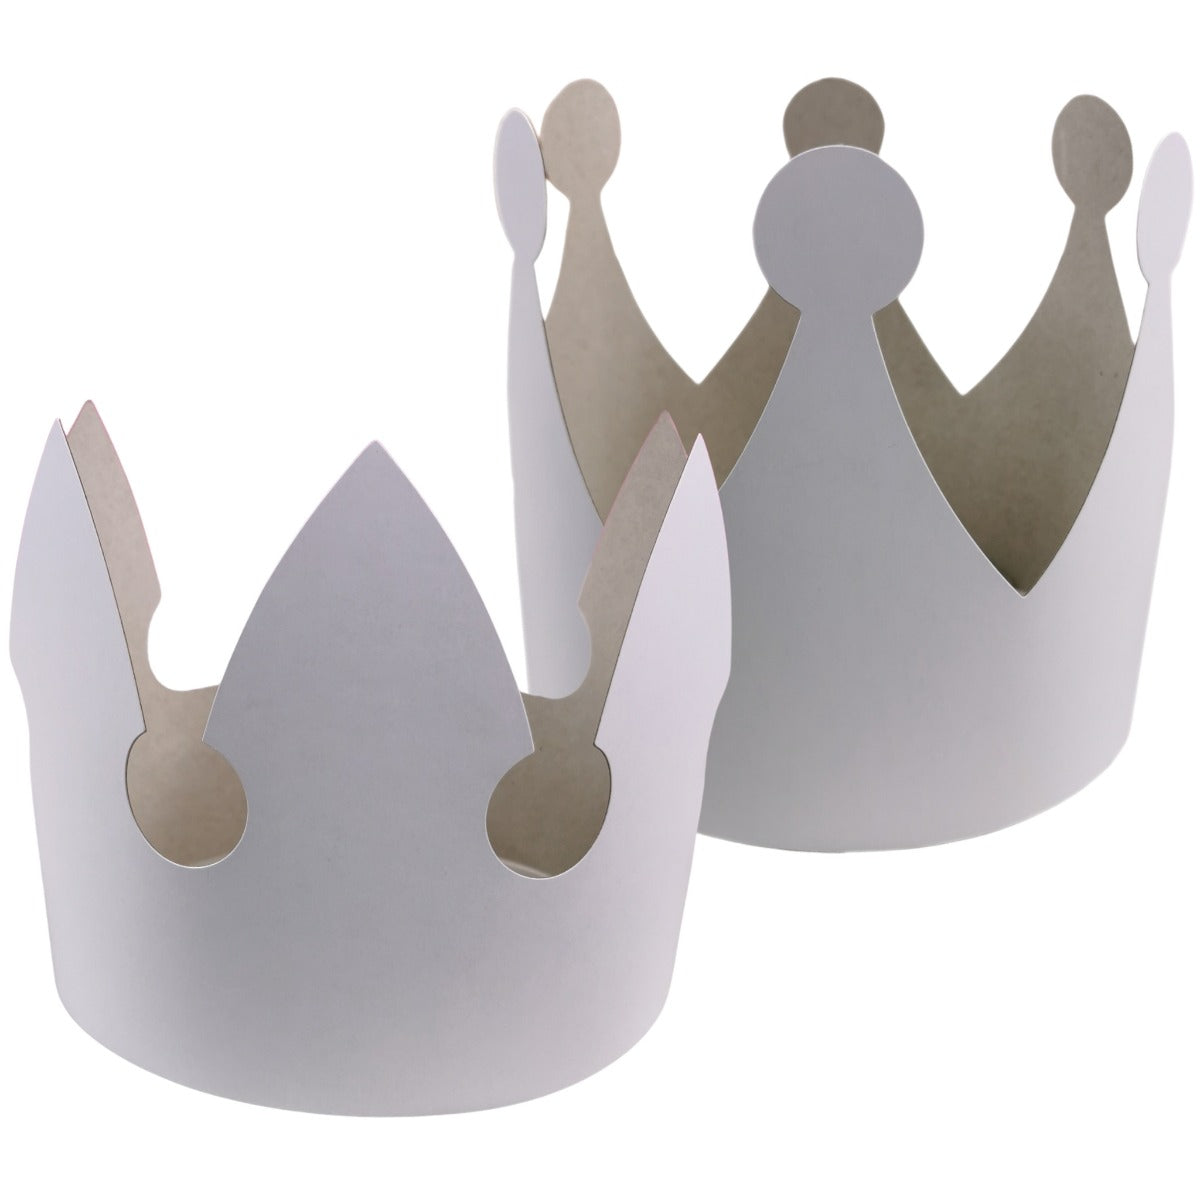 DIY Fancy Paper Crowns with Free Template